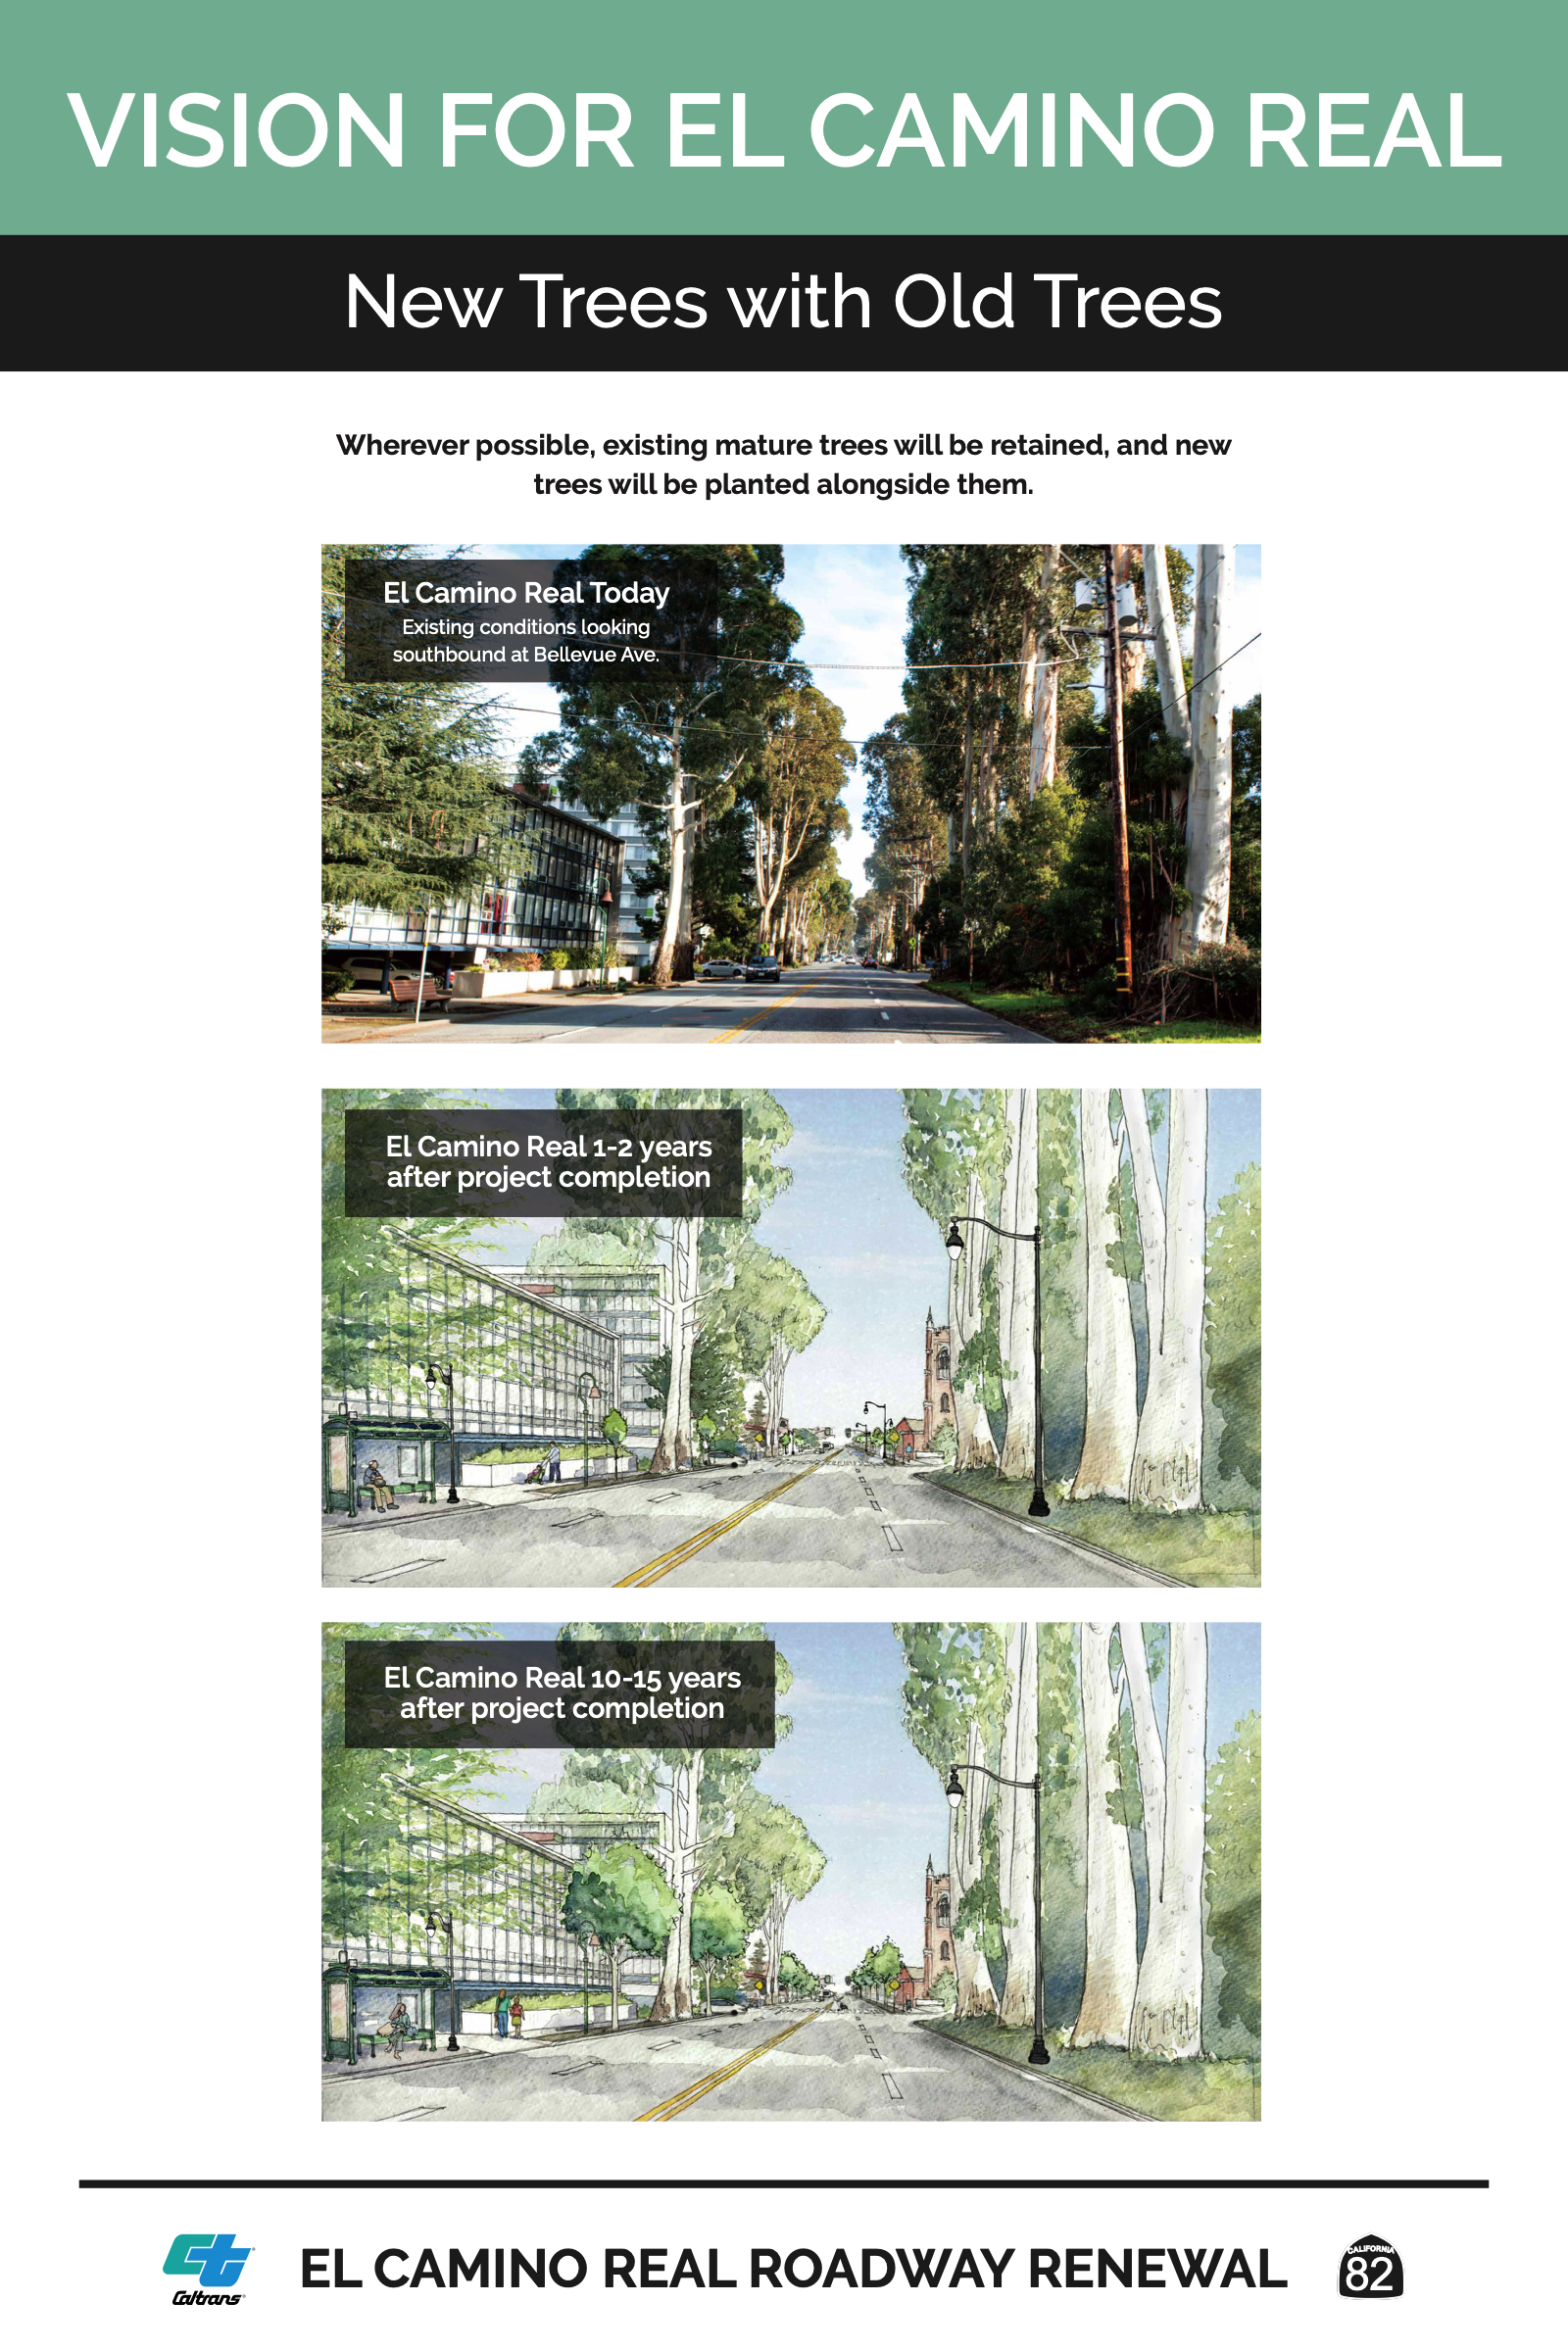 vision for el camino real - new trees with old trees